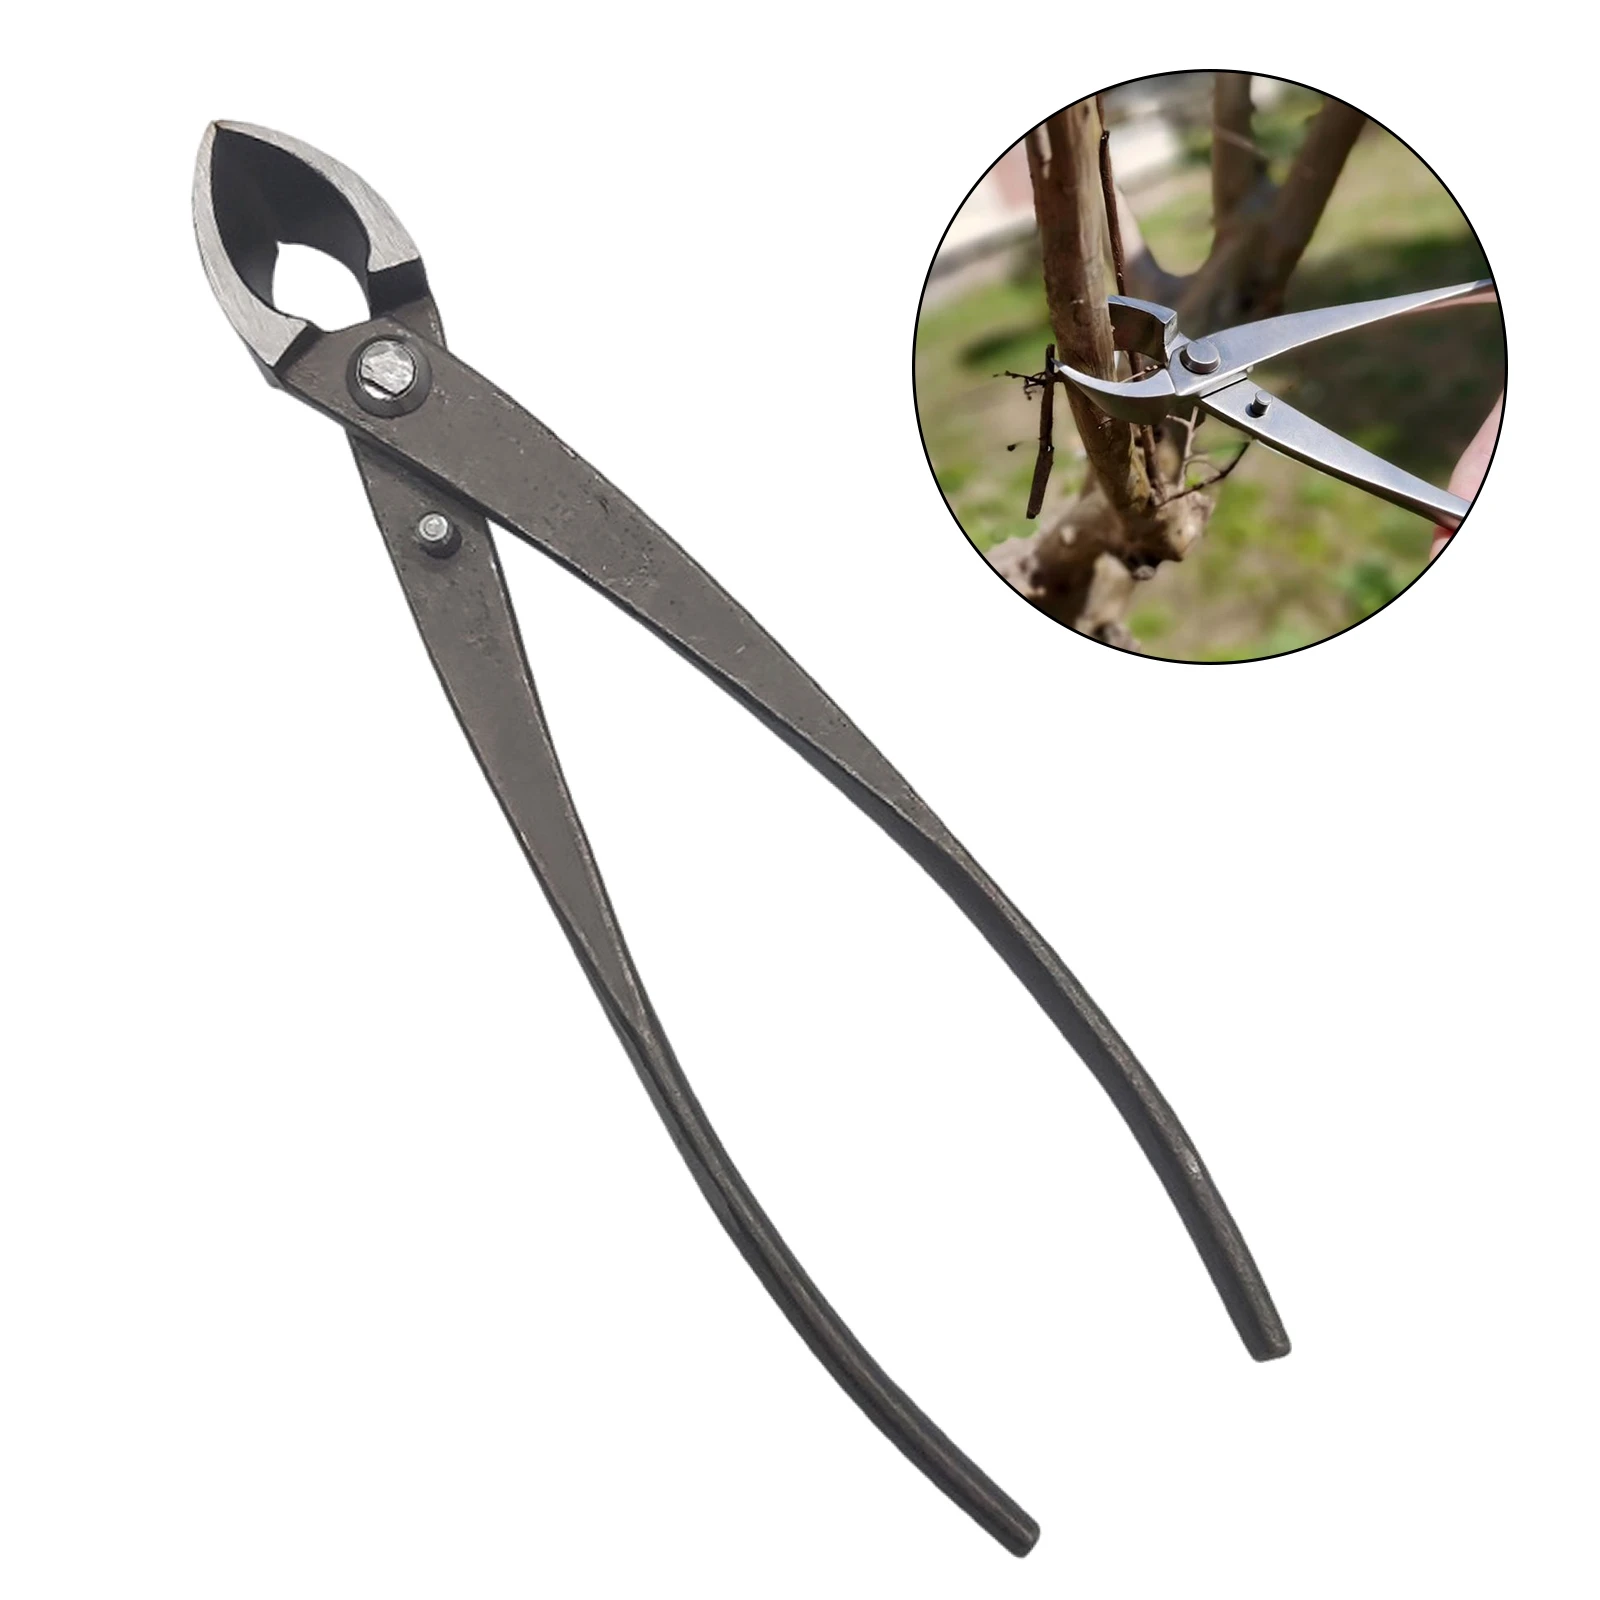 

210MM Plant Trimming Hand Shear Orchard Pruning Pruner Cut Secateur Shrub Garden Scissor Tools Anvil Branches